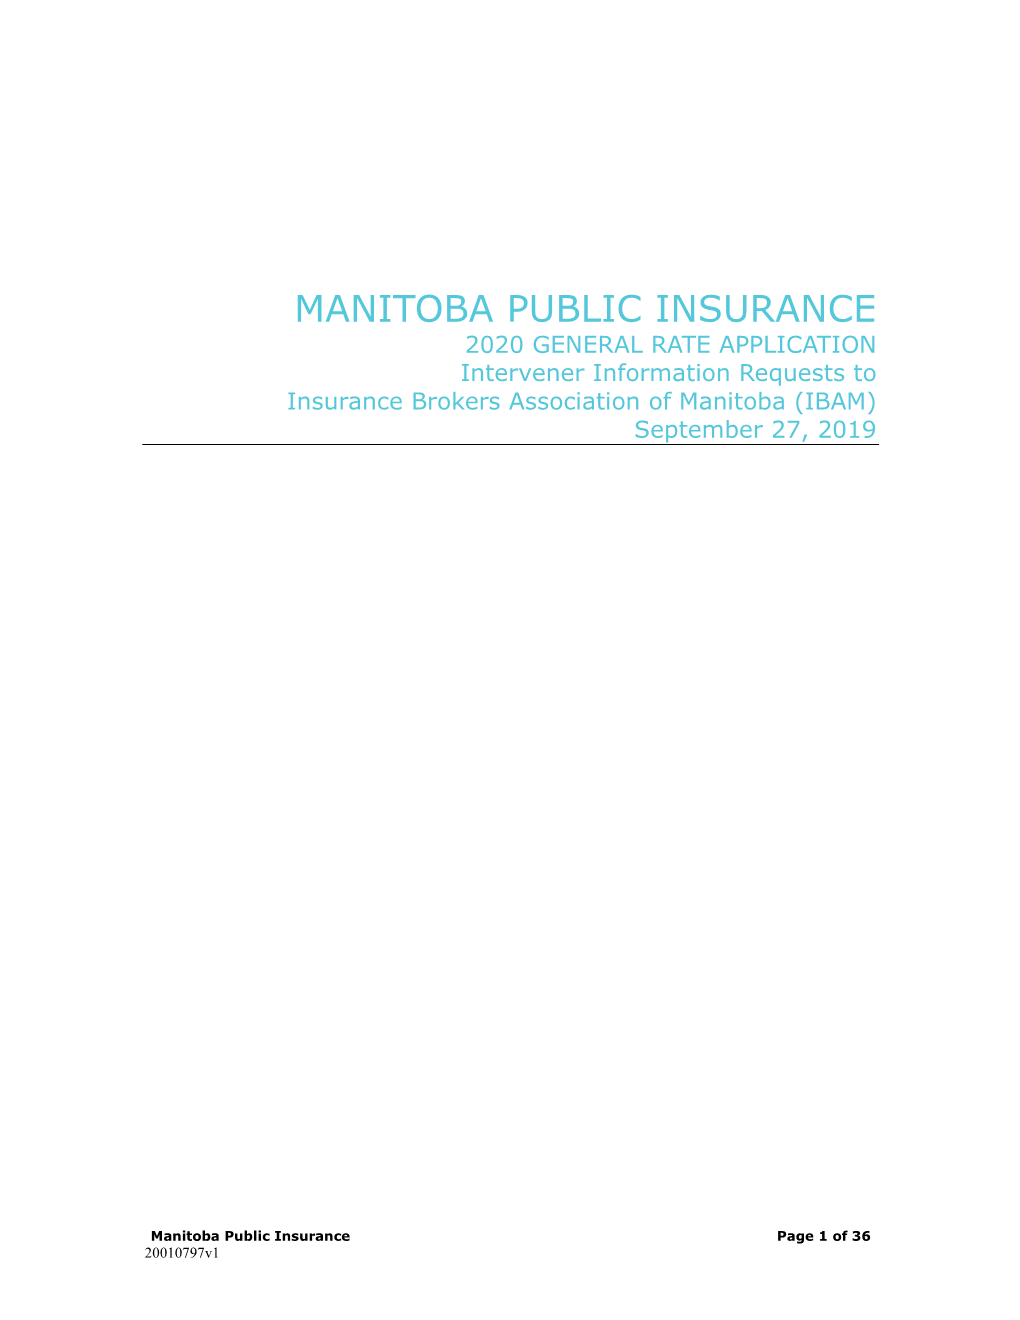 MANITOBA PUBLIC INSURANCE 2020 GENERAL RATE APPLICATION Intervener Information Requests to Insurance Brokers Association of Manitoba (IBAM) September 27, 2019